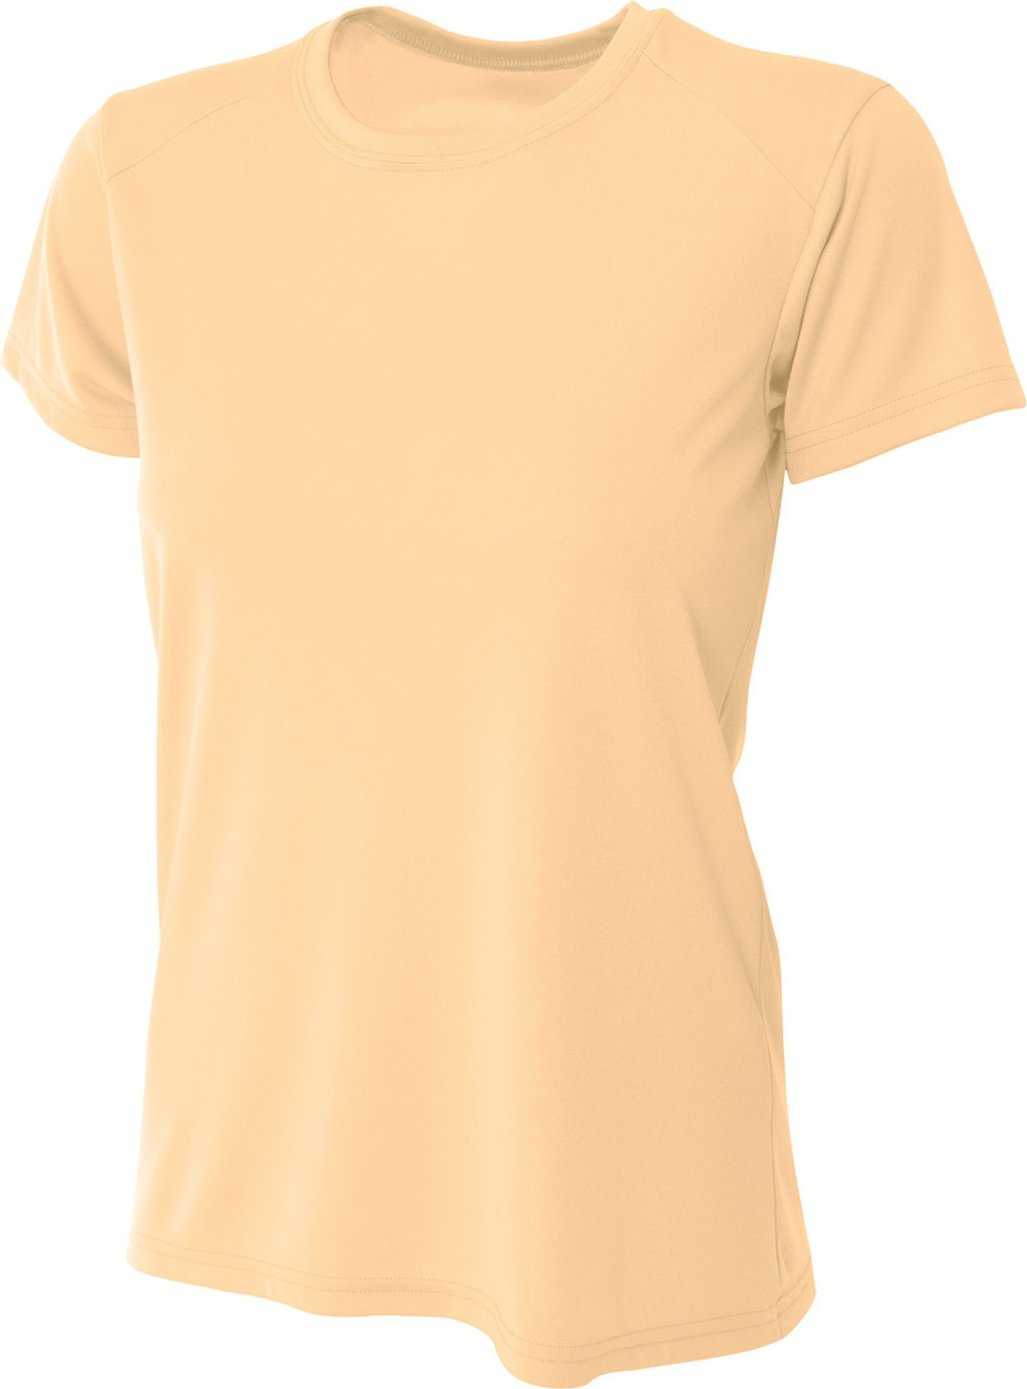 A4 NW3201 Ladies' Cooling Performance T-Shirt - MELON - HIT a Double - 2